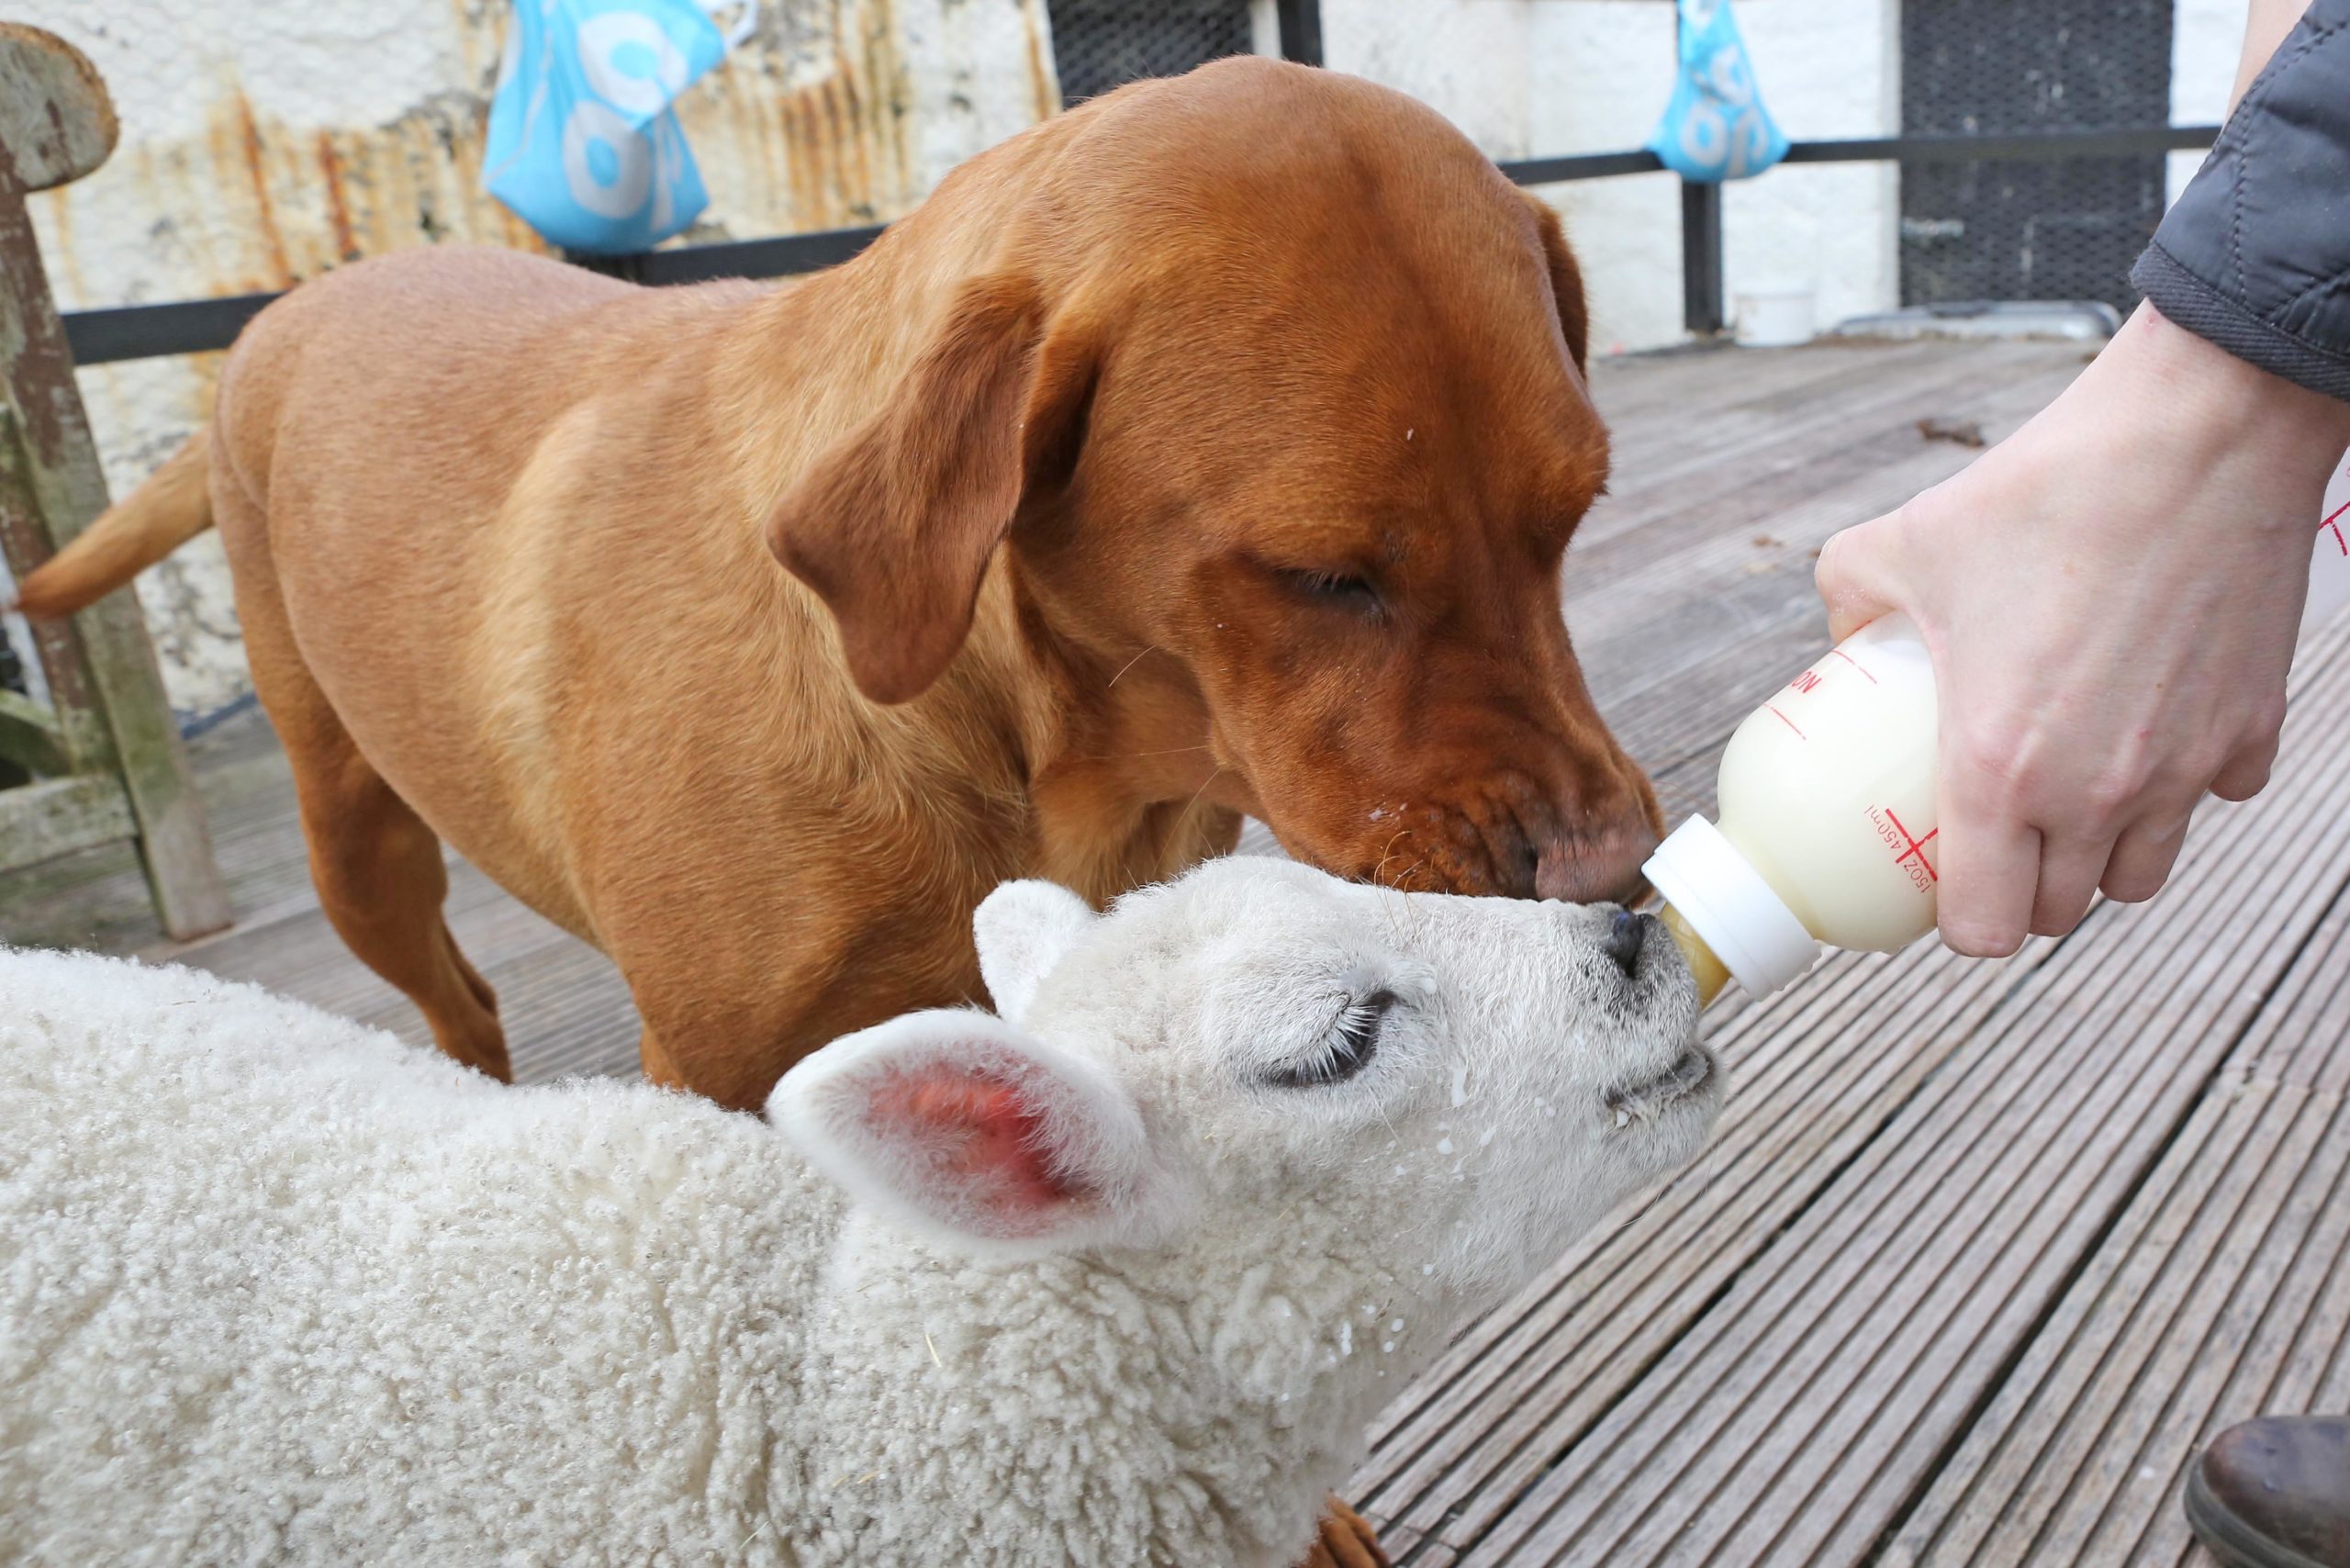 Photo by Peter Jolly/Shutterstock (10268711s)
Effie the lamb and Meg the Labrador who have become good friends
Effie the lamb who thinks she is a dog, Cromdale, Scotland - 03 Jun 2019
*Full story: https://www.rexfeatures.com/nanolink/uqhb
Effie the lamb thinks she's a dog  and she's inseparable from her two best canine friends. The two-month-old 'sheepdog' goes for walkies with unlikely companions German Shepherd Breagha and Labrador Meg - then naps with them afterwards. The tiny lamb was taken in by Gemma MacLeod, 37, aged just two days old. The weakest of triplets, she had a bad leg which at first left her lame. But now she's happy as Larry playing with the dogs - and even tries to steal their food. Ms MacLeod said: 'She's really sweet  she thinks she's a dog. She wasn't supposed to be a pet but she was one of triplets and the mother couldn't look after them all.